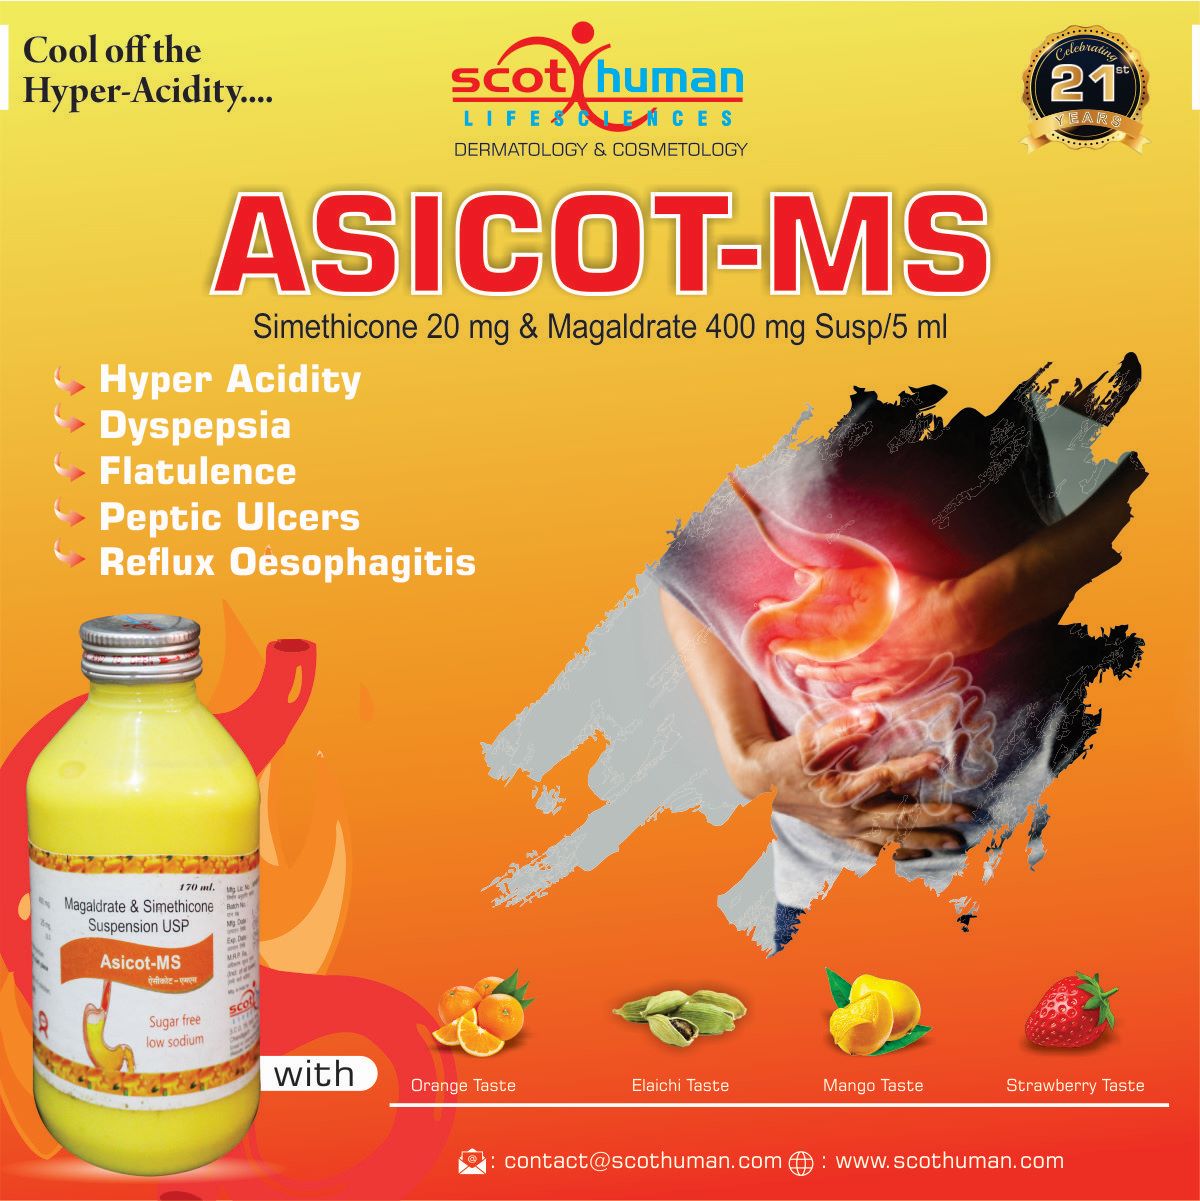 Product Name: Asicot MS, Compositions of Asicot MS are Magaldrate and  Simethicone Suspension Usp - Pharma Drugs and Chemicals